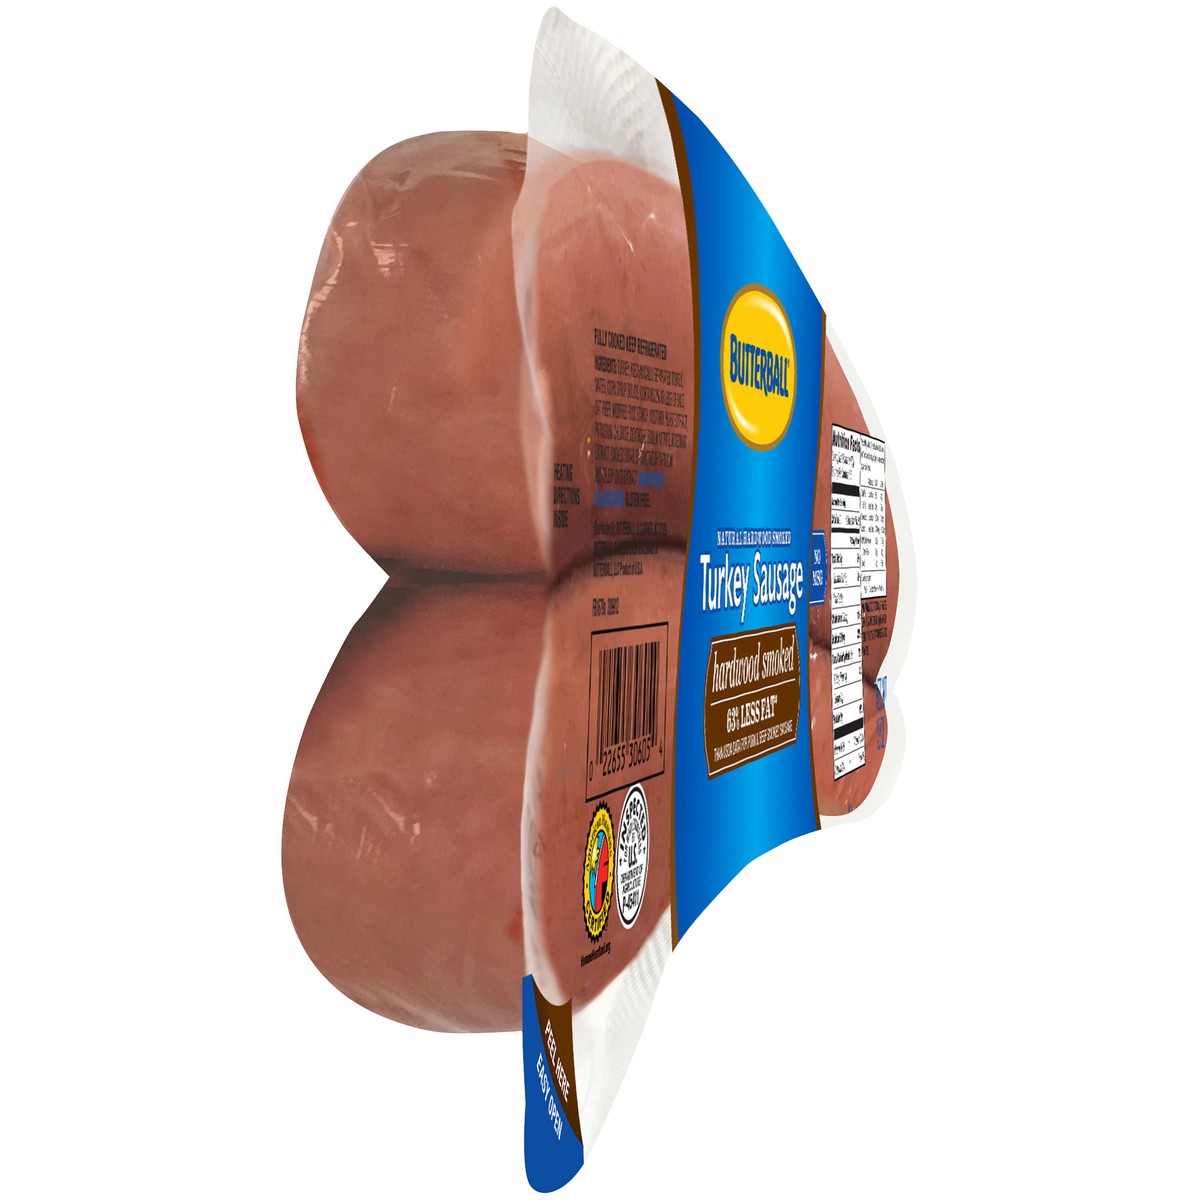 slide 13 of 14, Butterball Smoked Turkey Dinner Sausage - 2 Count 13 Oz, 14 oz